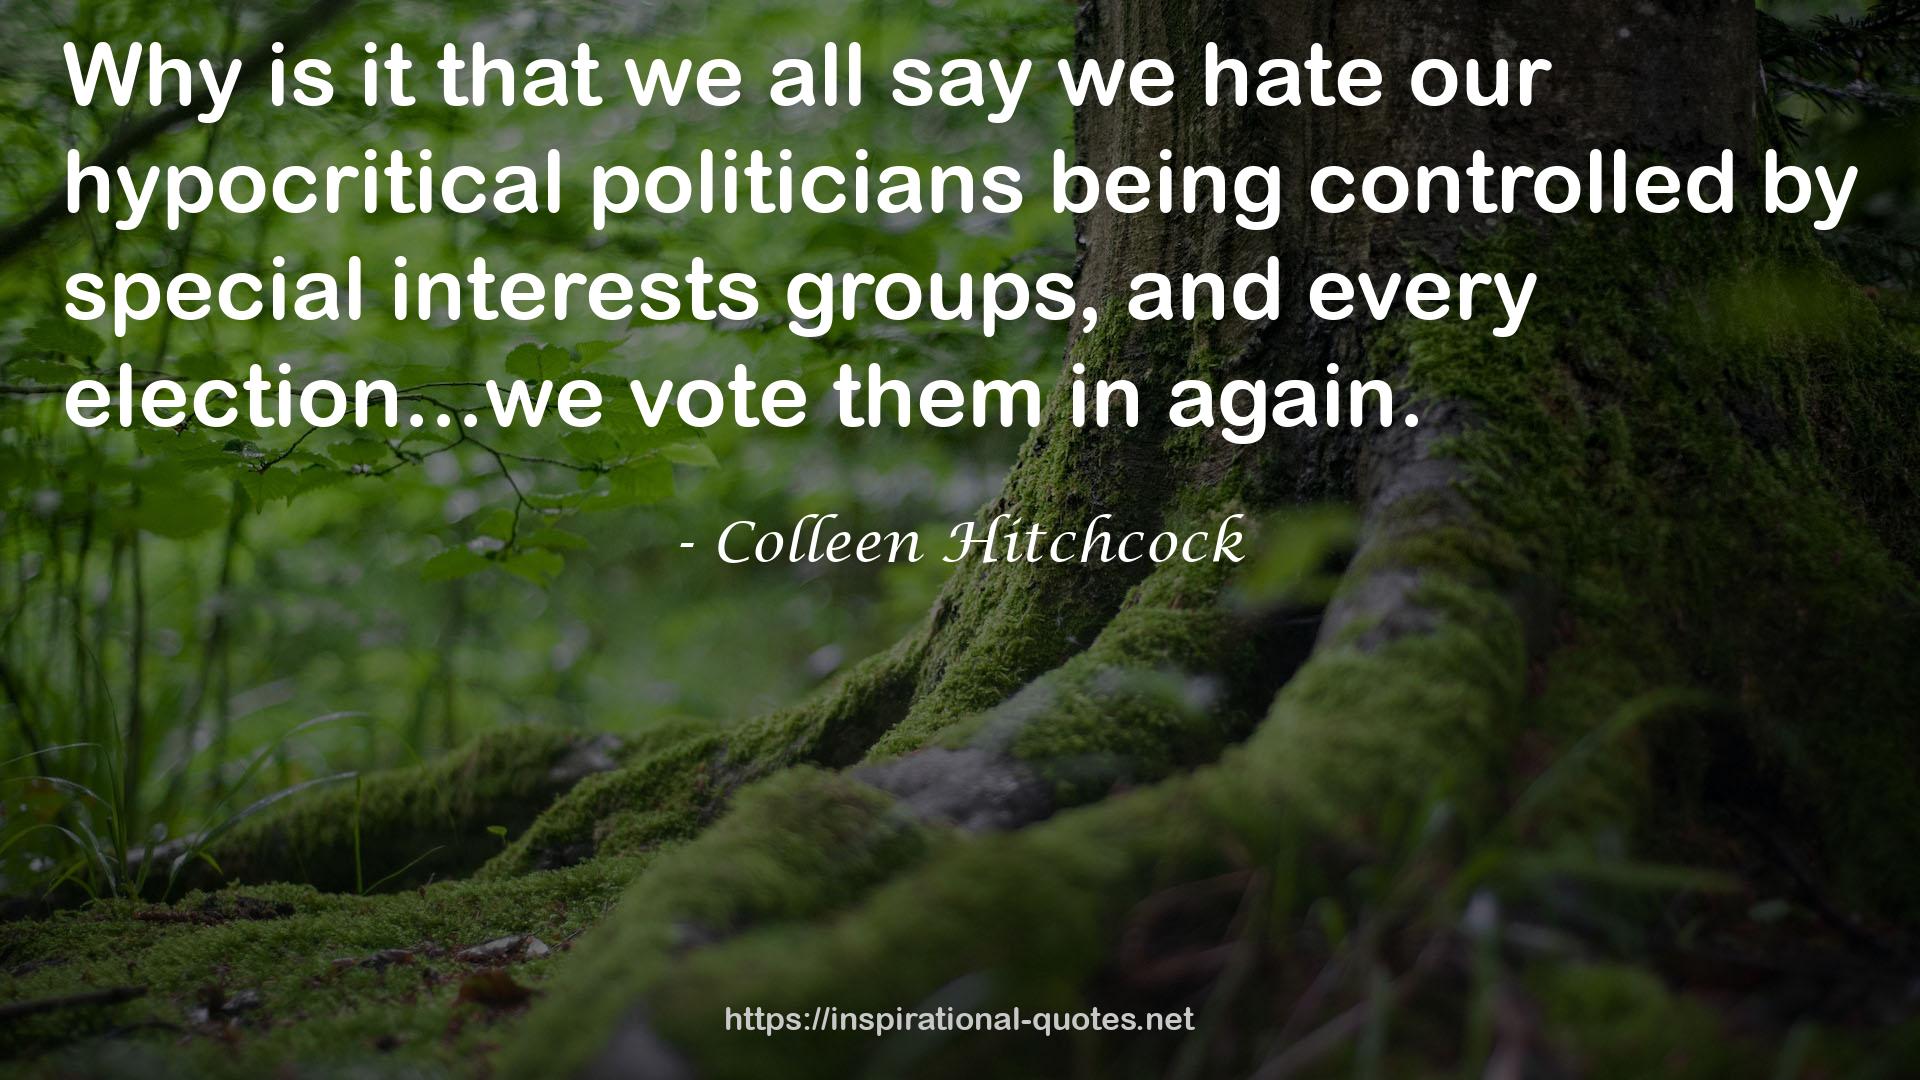 Colleen Hitchcock QUOTES